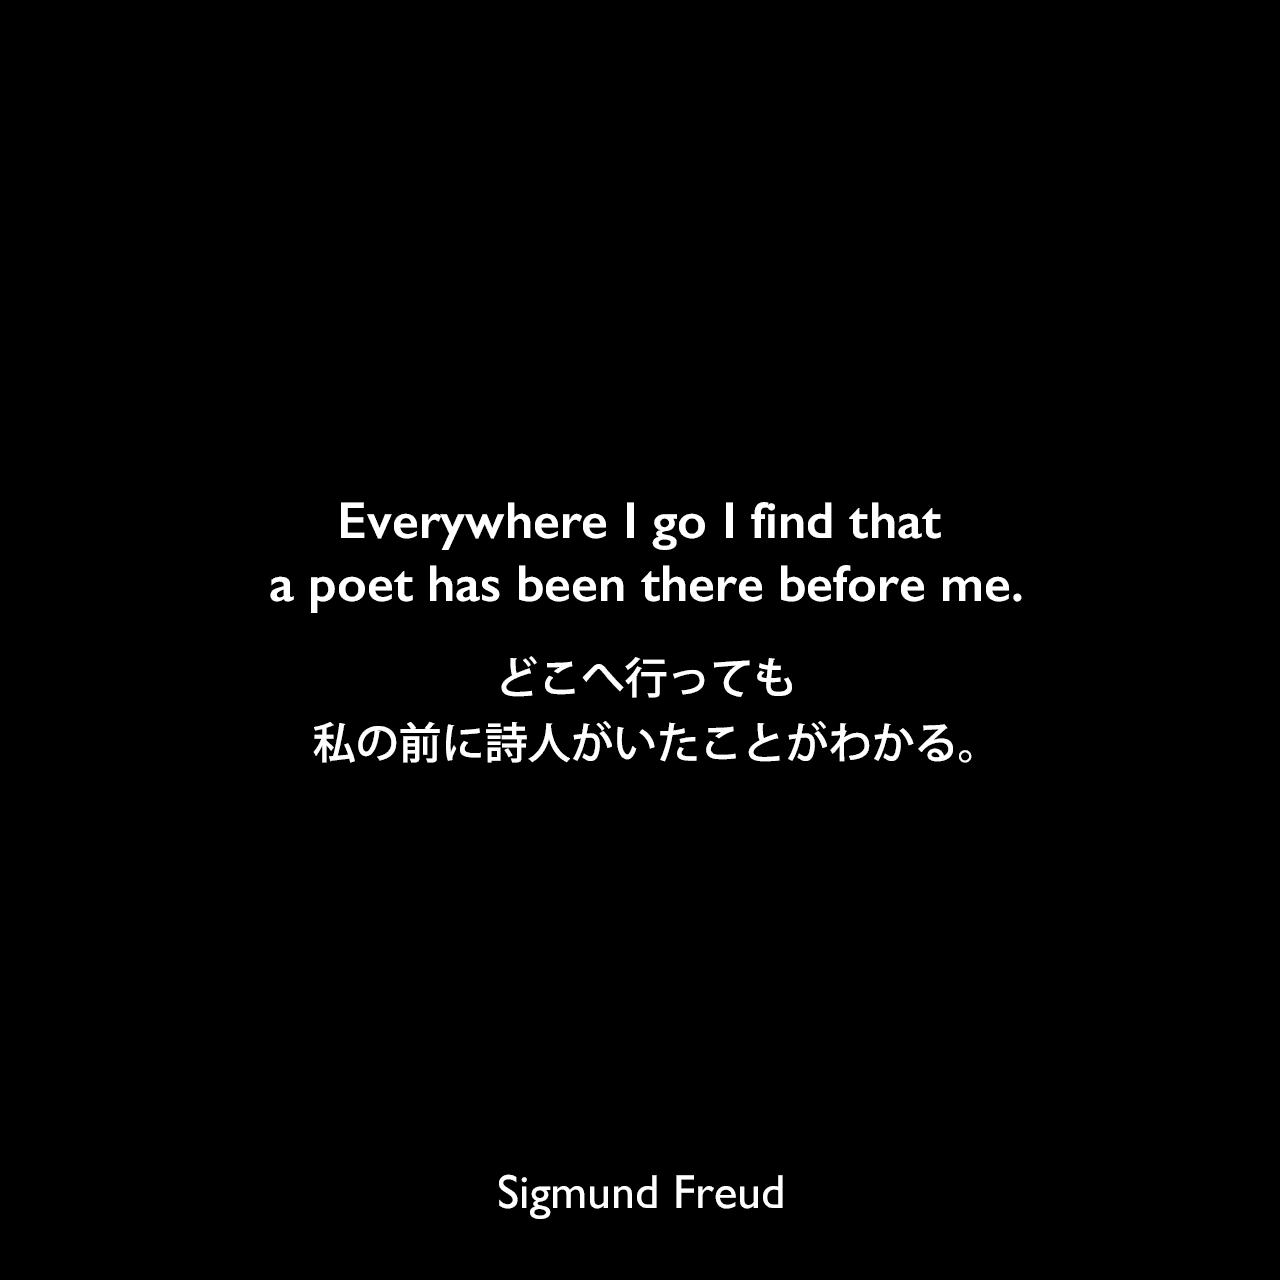 Everywhere I go I find that a poet has been there before me.どこへ行っても、私の前に詩人がいたことがわかる。Sigmund Freud